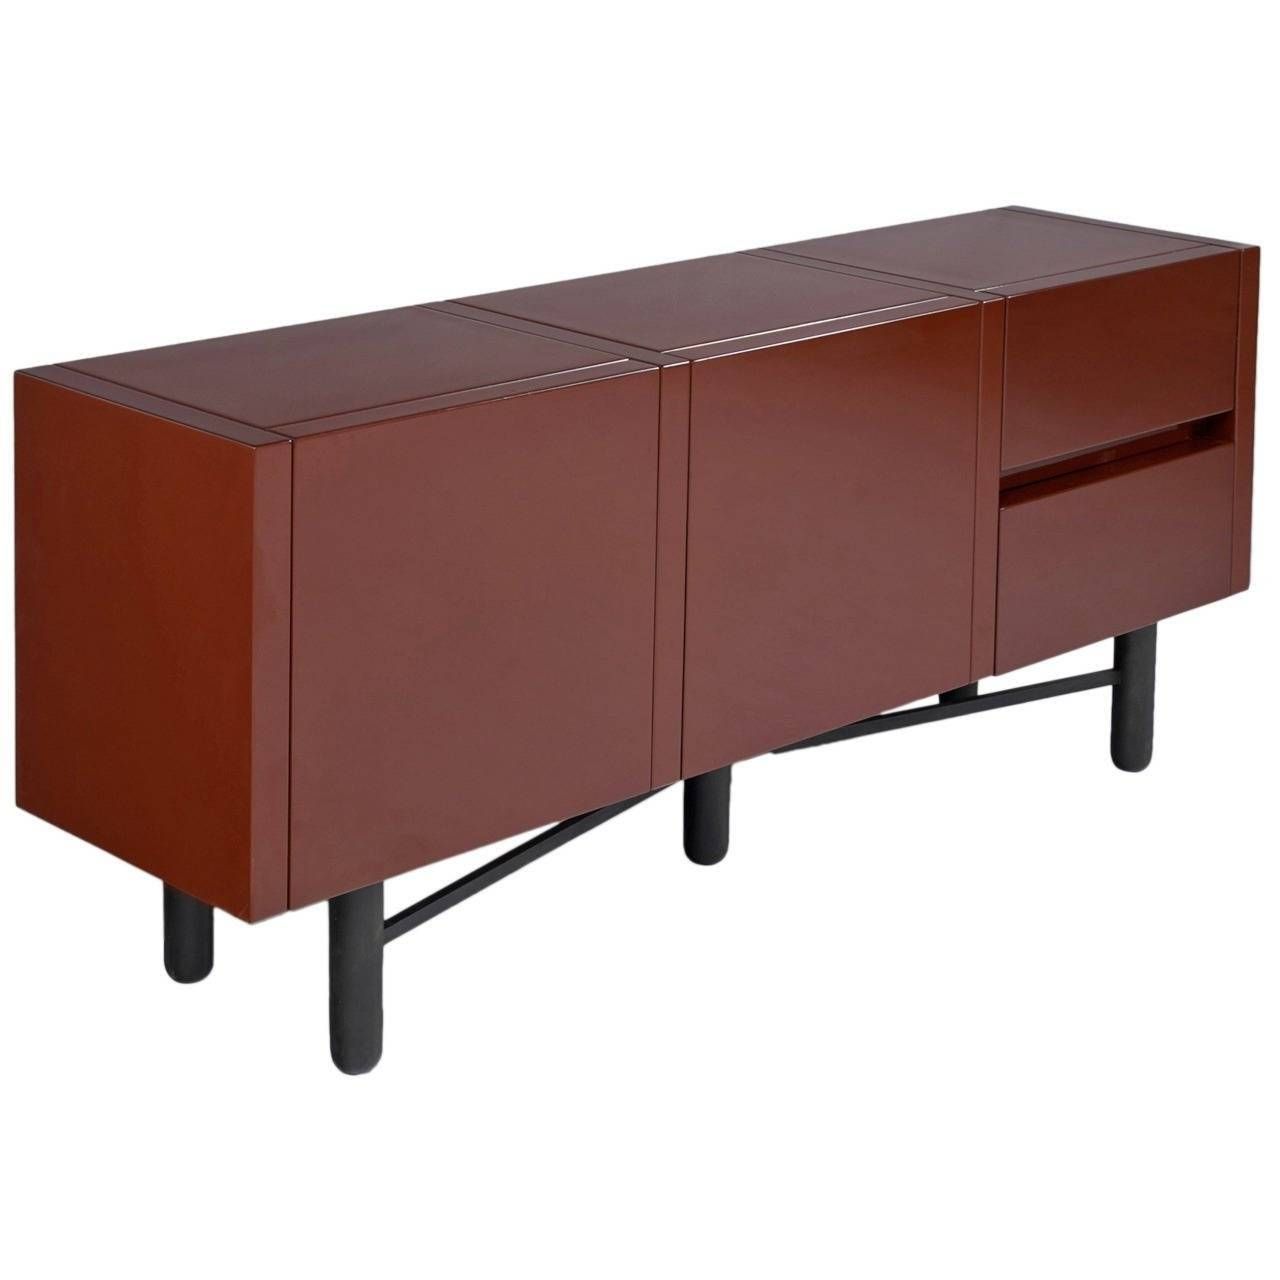 Roche Bobois Red Lacquered High Gloss Sideboard For Sale At 1stdibs Inside White High Gloss Sideboards (Photo 18 of 30)